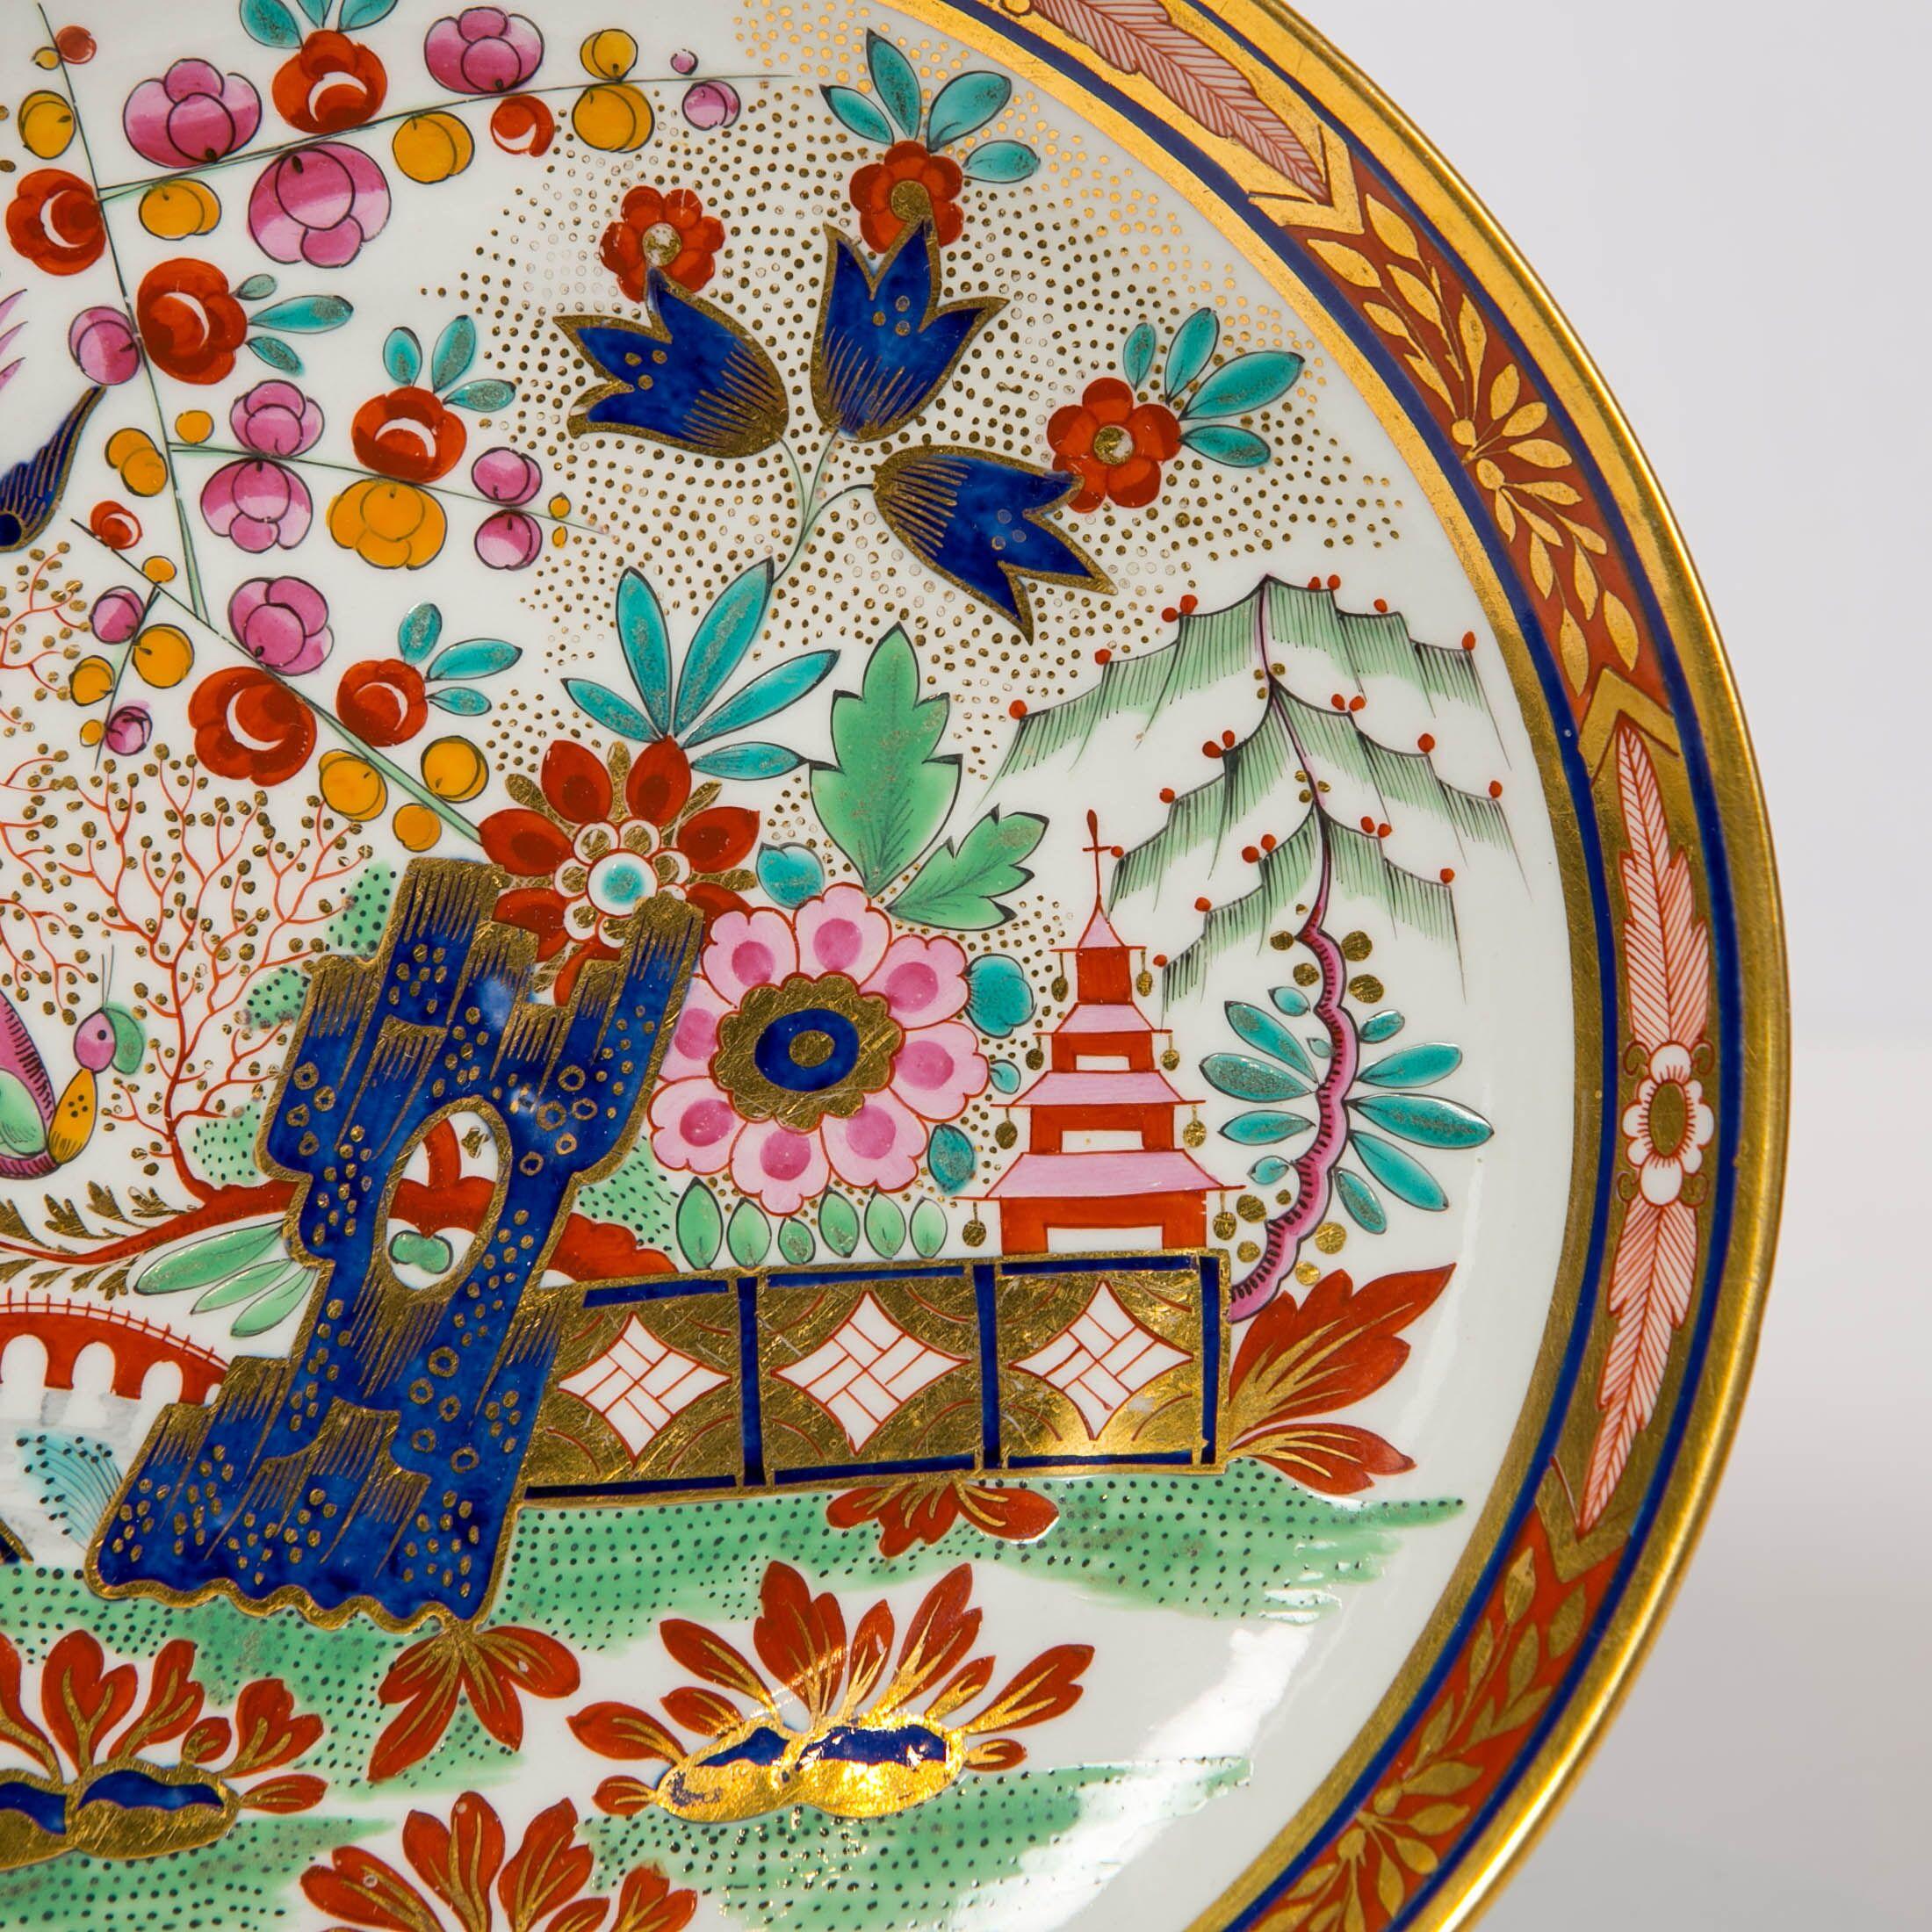 Chinoiserie Worcester Fence Pattern Dish Made in England Between 1792-1803